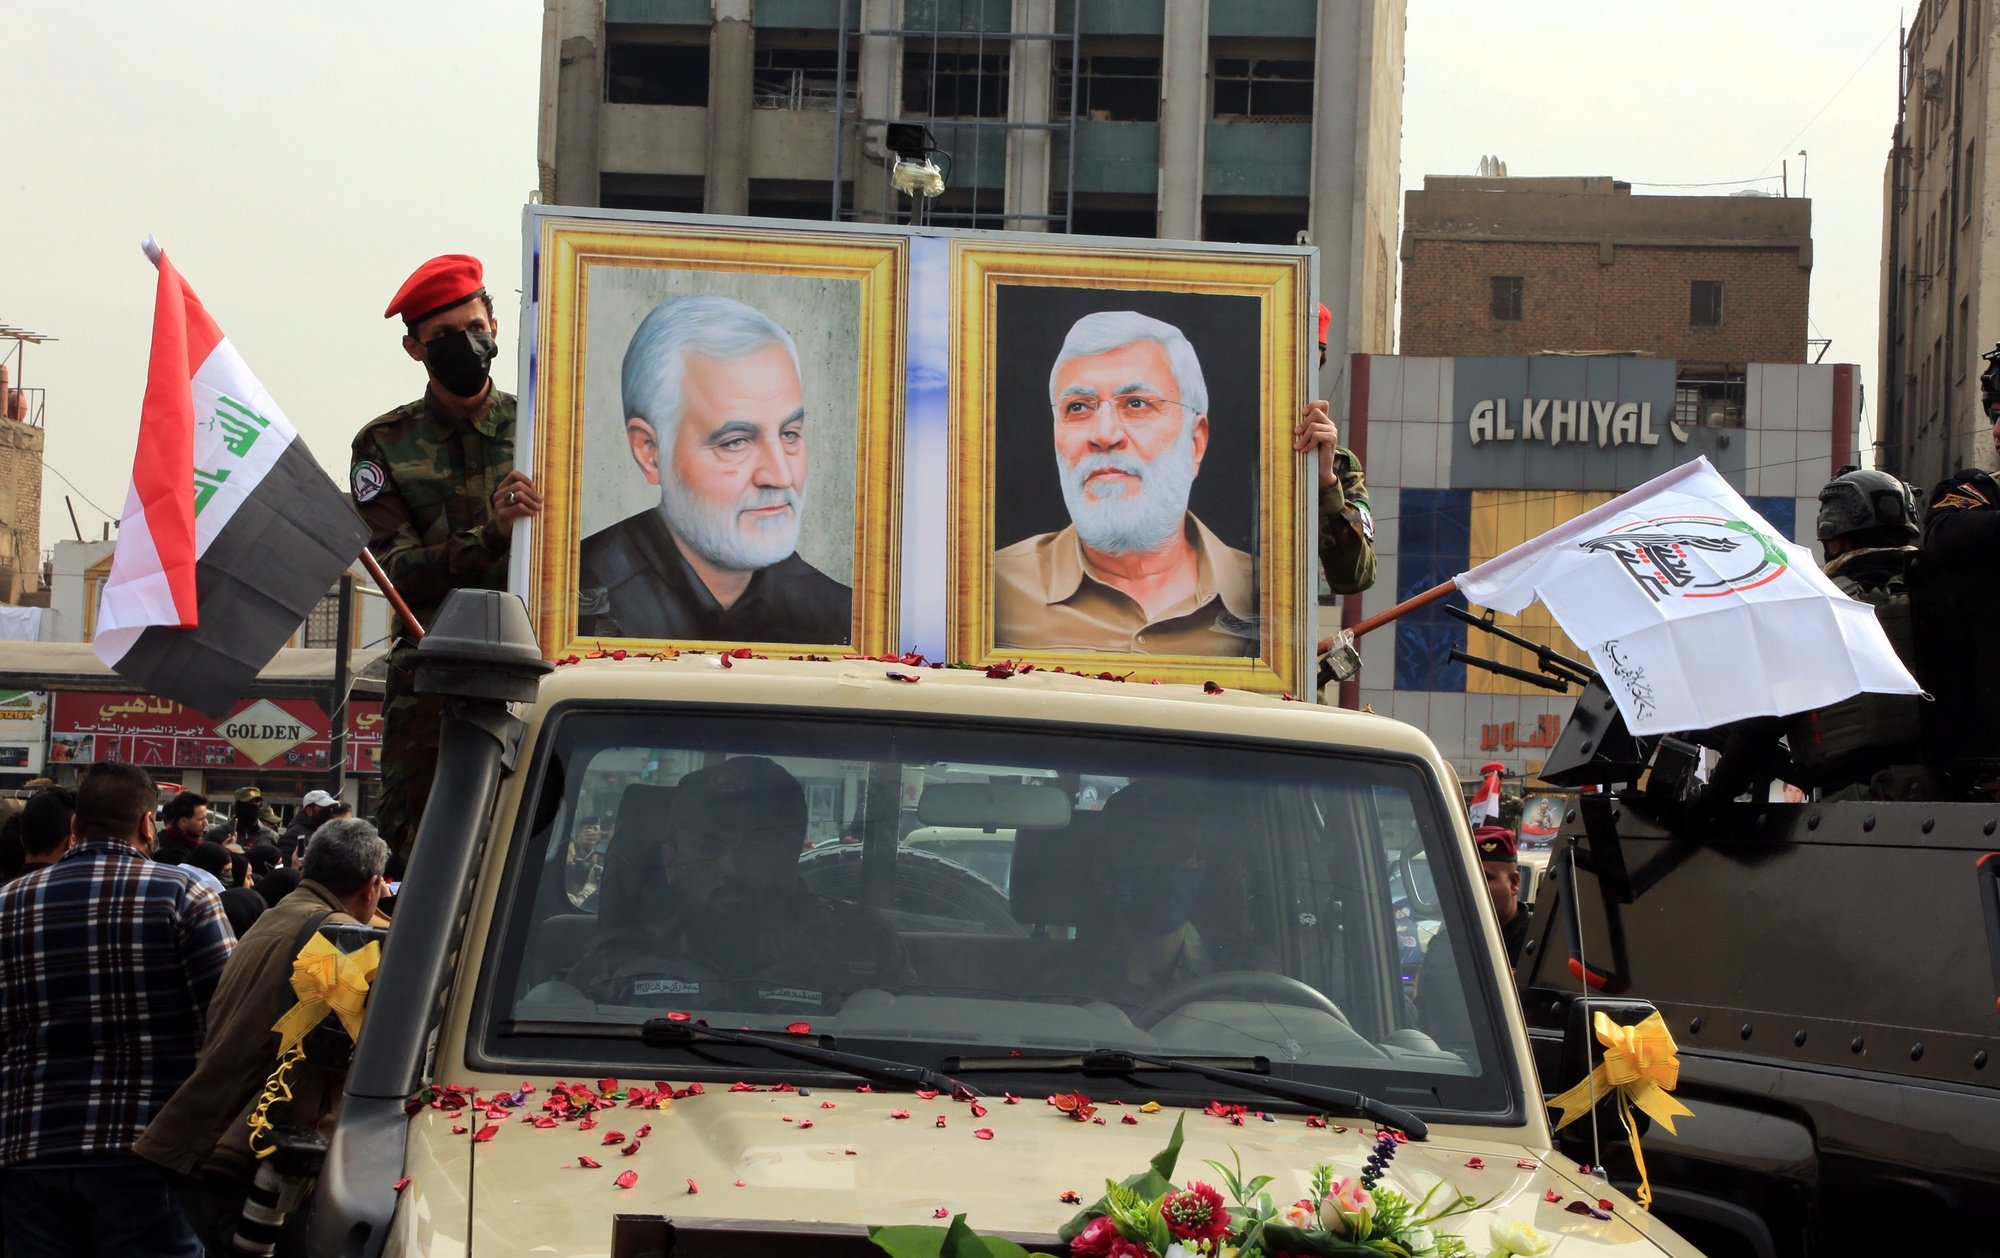 epa09659467 Members of Iraqi Shiite armed groups popular mobilization forces carry the pictures of slain Abu Mahdi al-Muhandis and general Qasem Soleimani, the head of Iran&#039;s Islamic Revolutionary Guard Corps&#039; elite Quds Force, during a symbolic funeral of Shiite fighters who were killed in a US airstrike near the Iraqi border with Syria, in central Baghdad, Iraq, 29 December 2021. Hundreds of Iraqi Shiite armed groups popular mobilization forces members staged a symbolic funeral on the second anniversary of the killing of 36 fighters of Shiite fighters in US airstrikes against their locations on the Iraq-Syria border on late December 2019, in response to drone attacks on its forces in Iraq.  EPA/AHMED JALIL